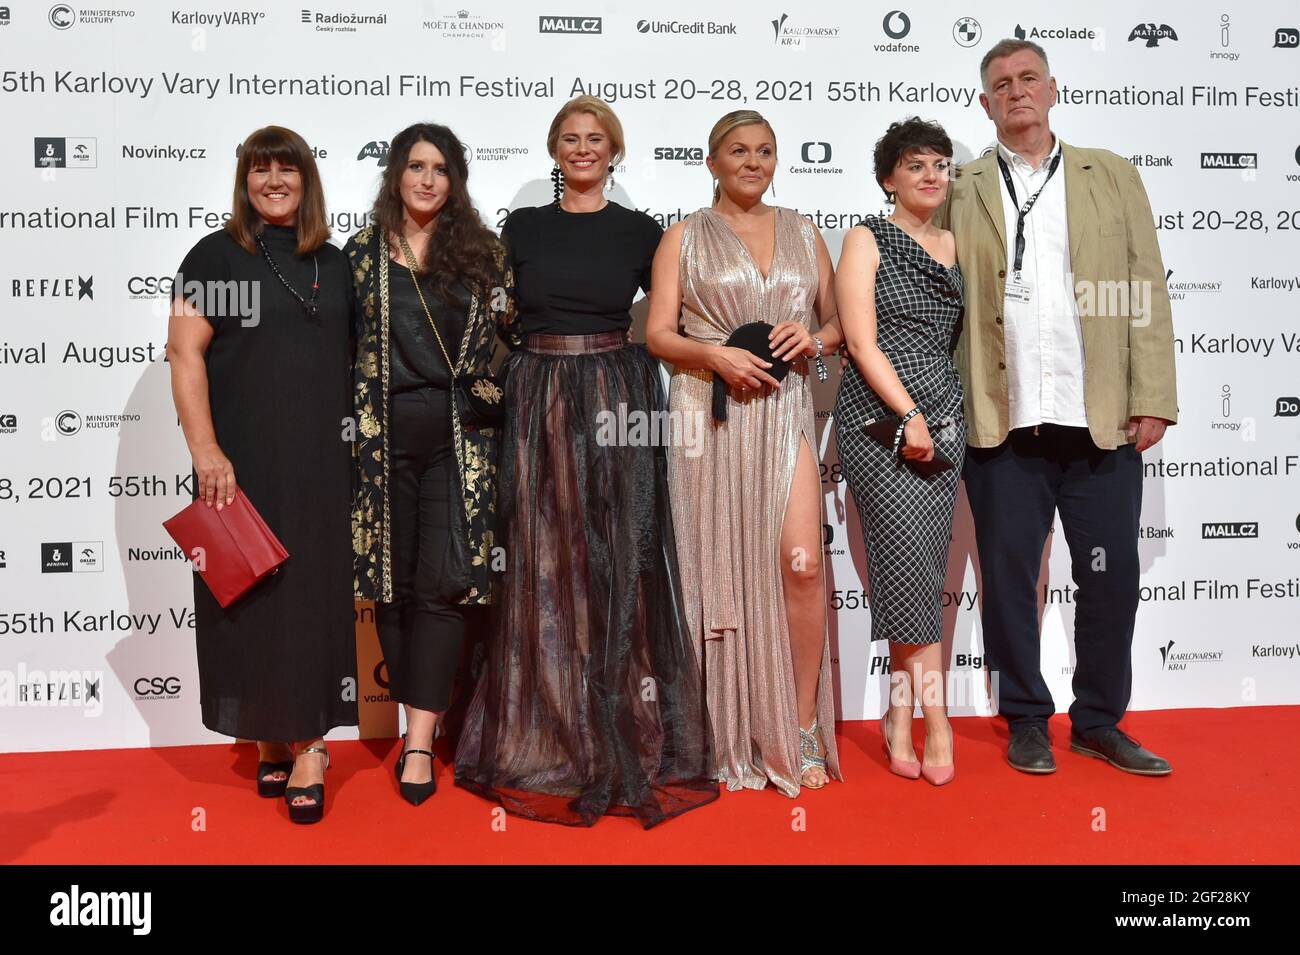 Karlovy Vary, Czech Republic. 22nd Aug, 2021. Actors and creative team of Croatian film The Staffroom from left Ankica Juric Tilic, Sonja Tarokic, Marina Redzepovic, Nives Ivankovic, Maja Posavec, Stojan Matavulj pose for photographer during the start of the 55th edition of the Karlovy Vary International Film Festival, Czech Republic, August 22, 2021. The international film festival returns to the Czech spa of Karlovy Vary after two years due to a delay caused by the coronavirus pandemic. Credit: Slavomir Kubes/CTK Photo/Alamy Live News Stock Photo